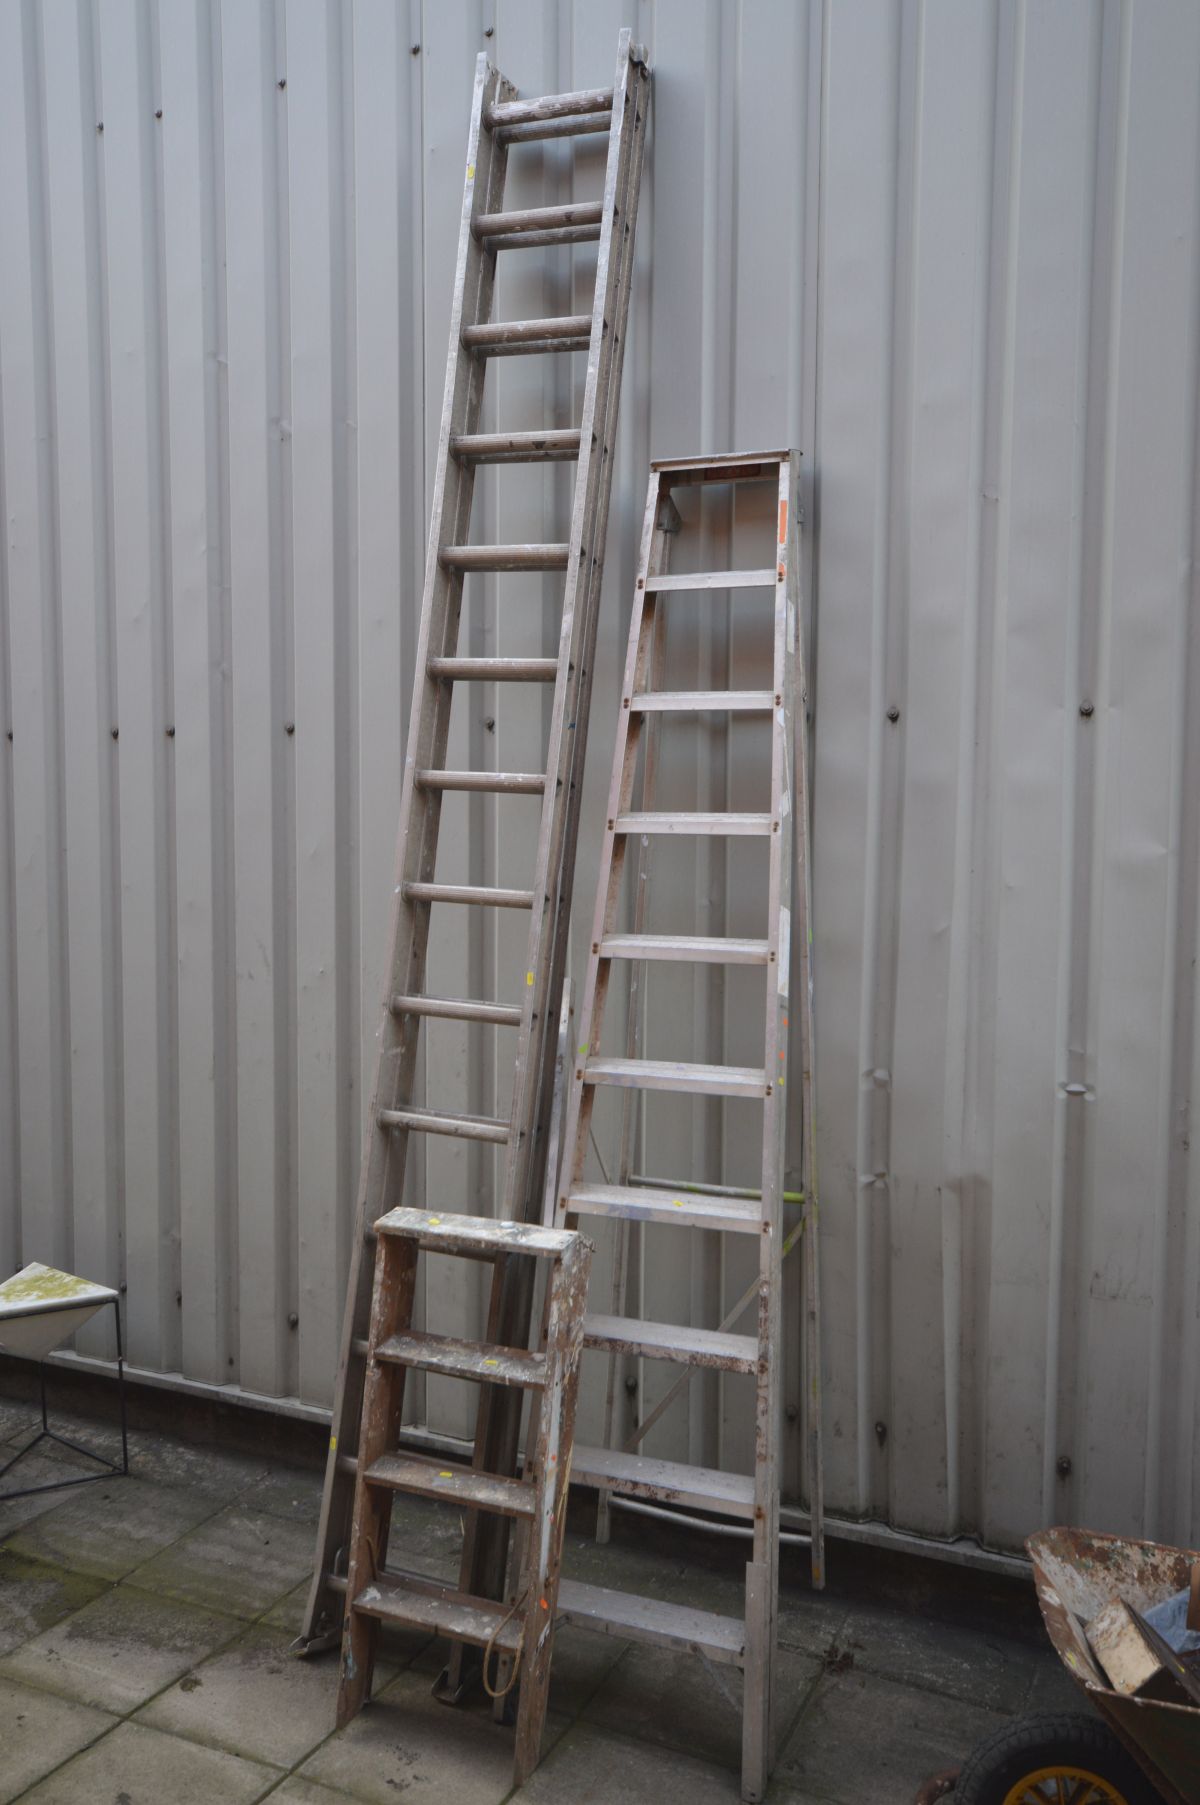 A SET OF ALIMINIUM DOUBLE EXTENSION LADDERS, length 350cm (Sd), another set of aluminium step